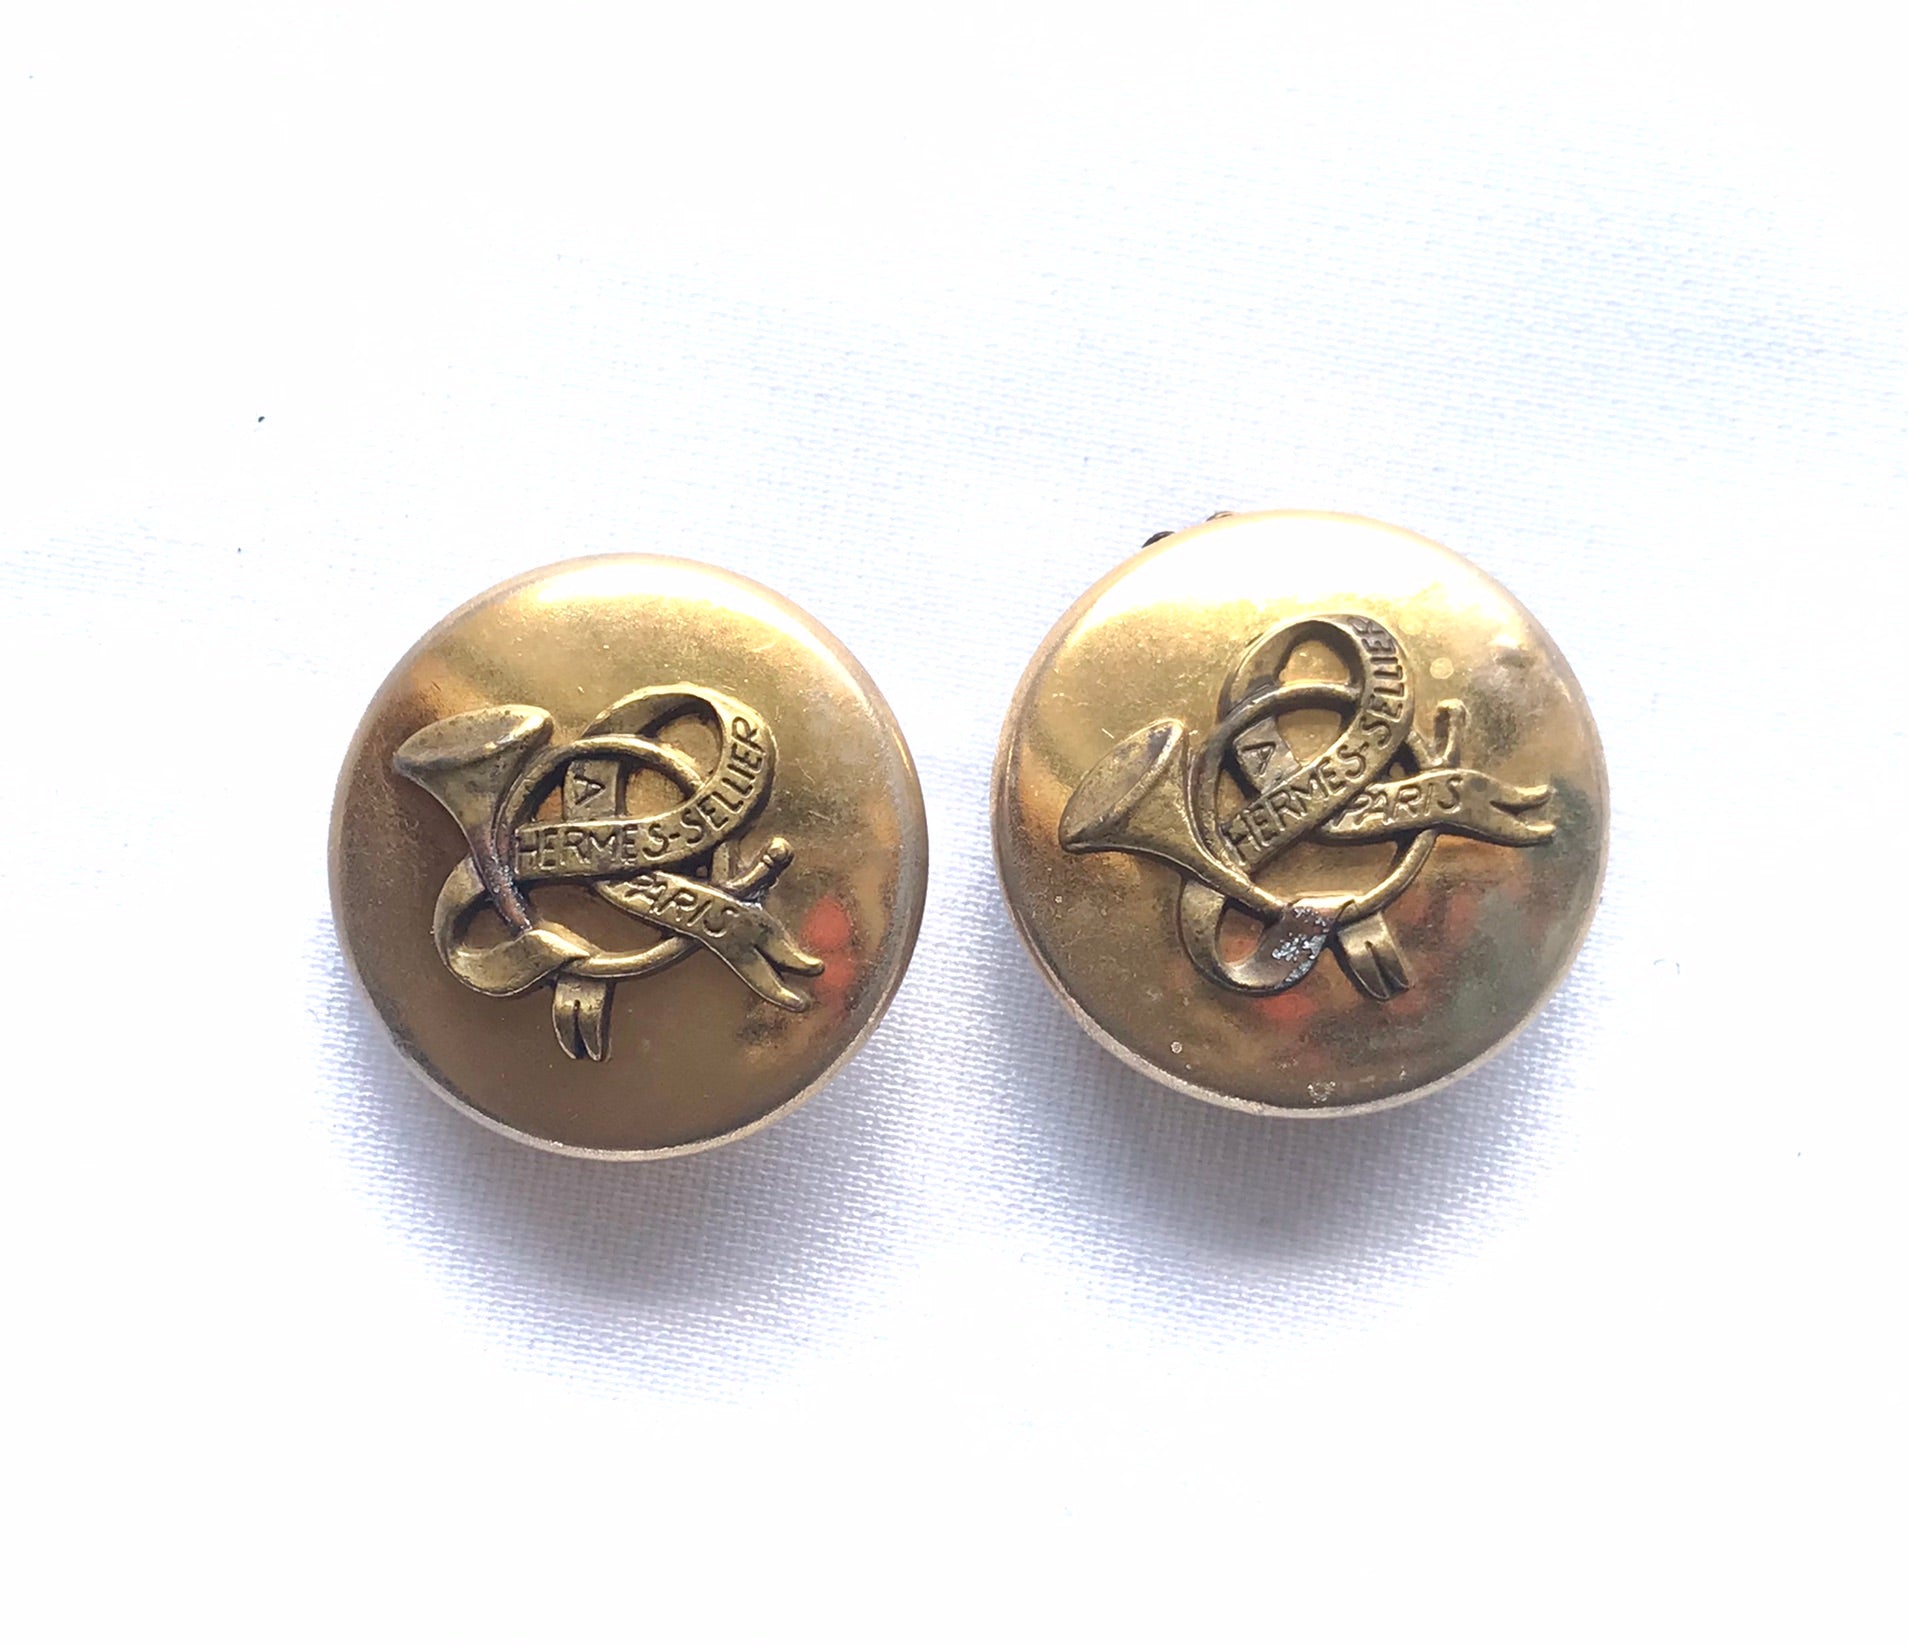 Vintage HERMES gold tone round earrings with trumpet and ribbon design. jewelry piece back in the old era. Classic Sellier series. 210805